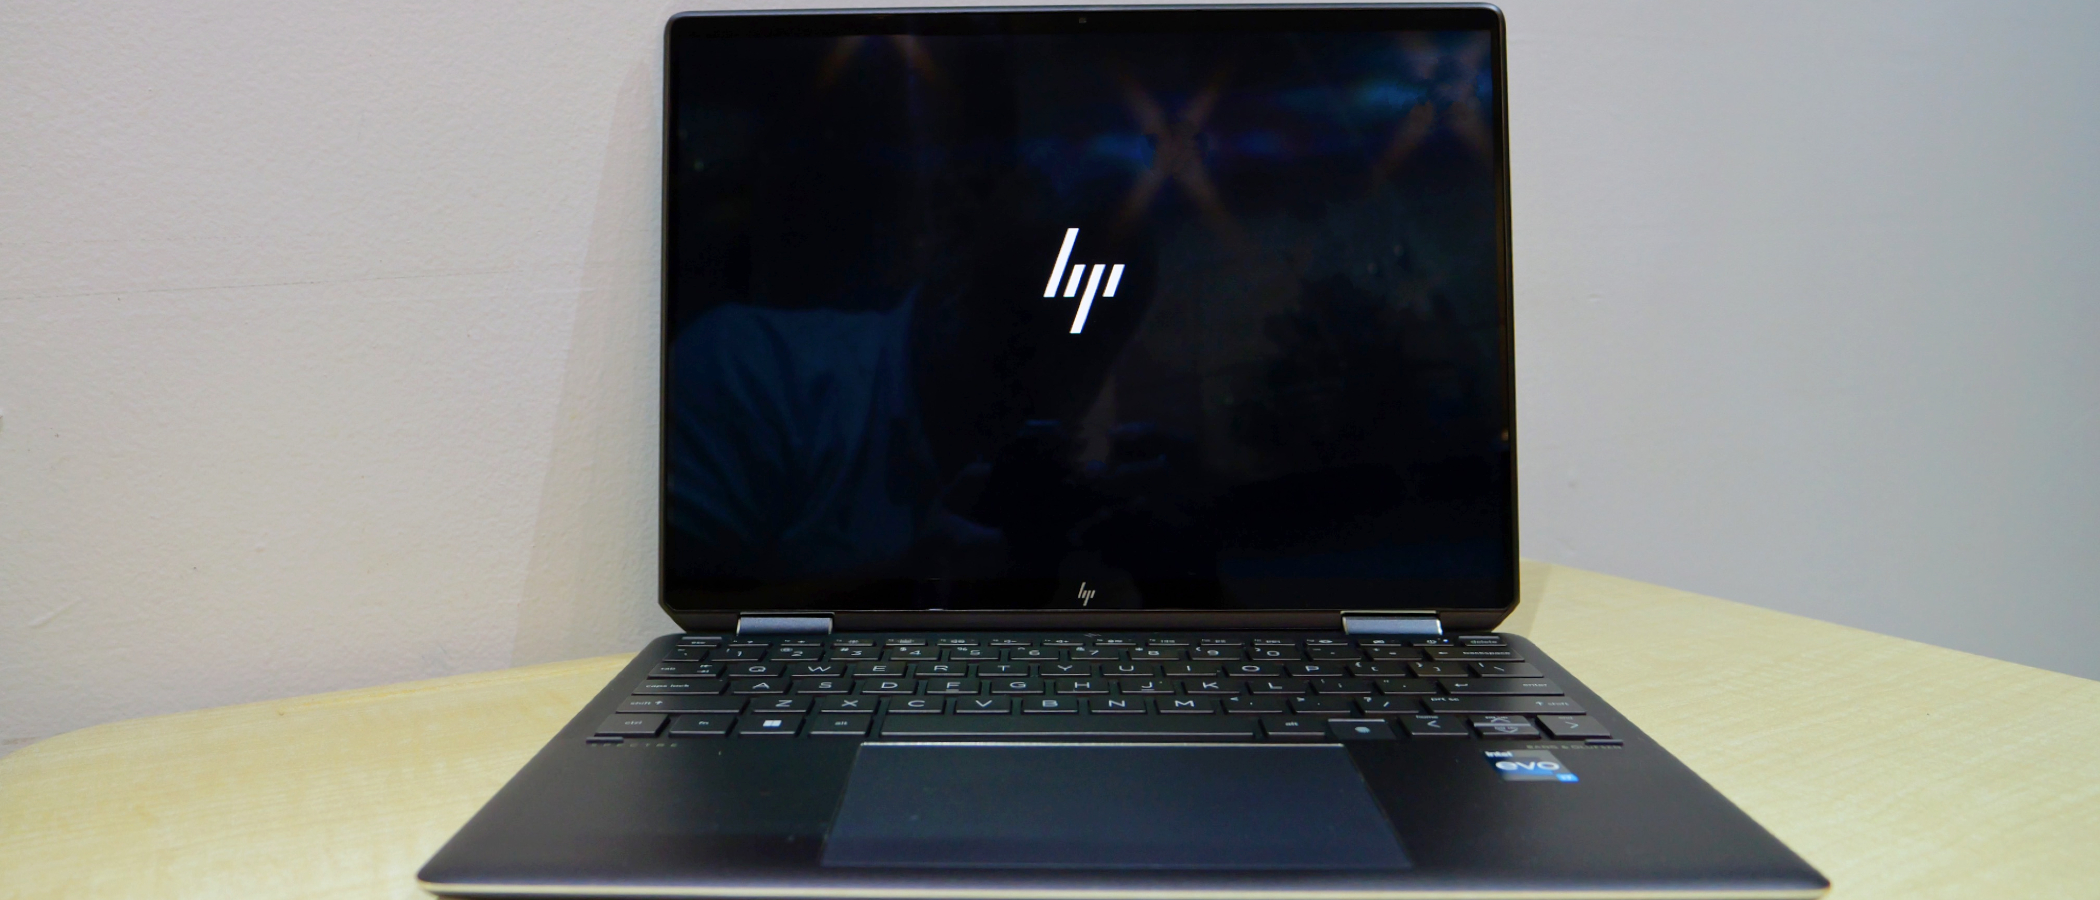 HP Spectre x360 13 Review